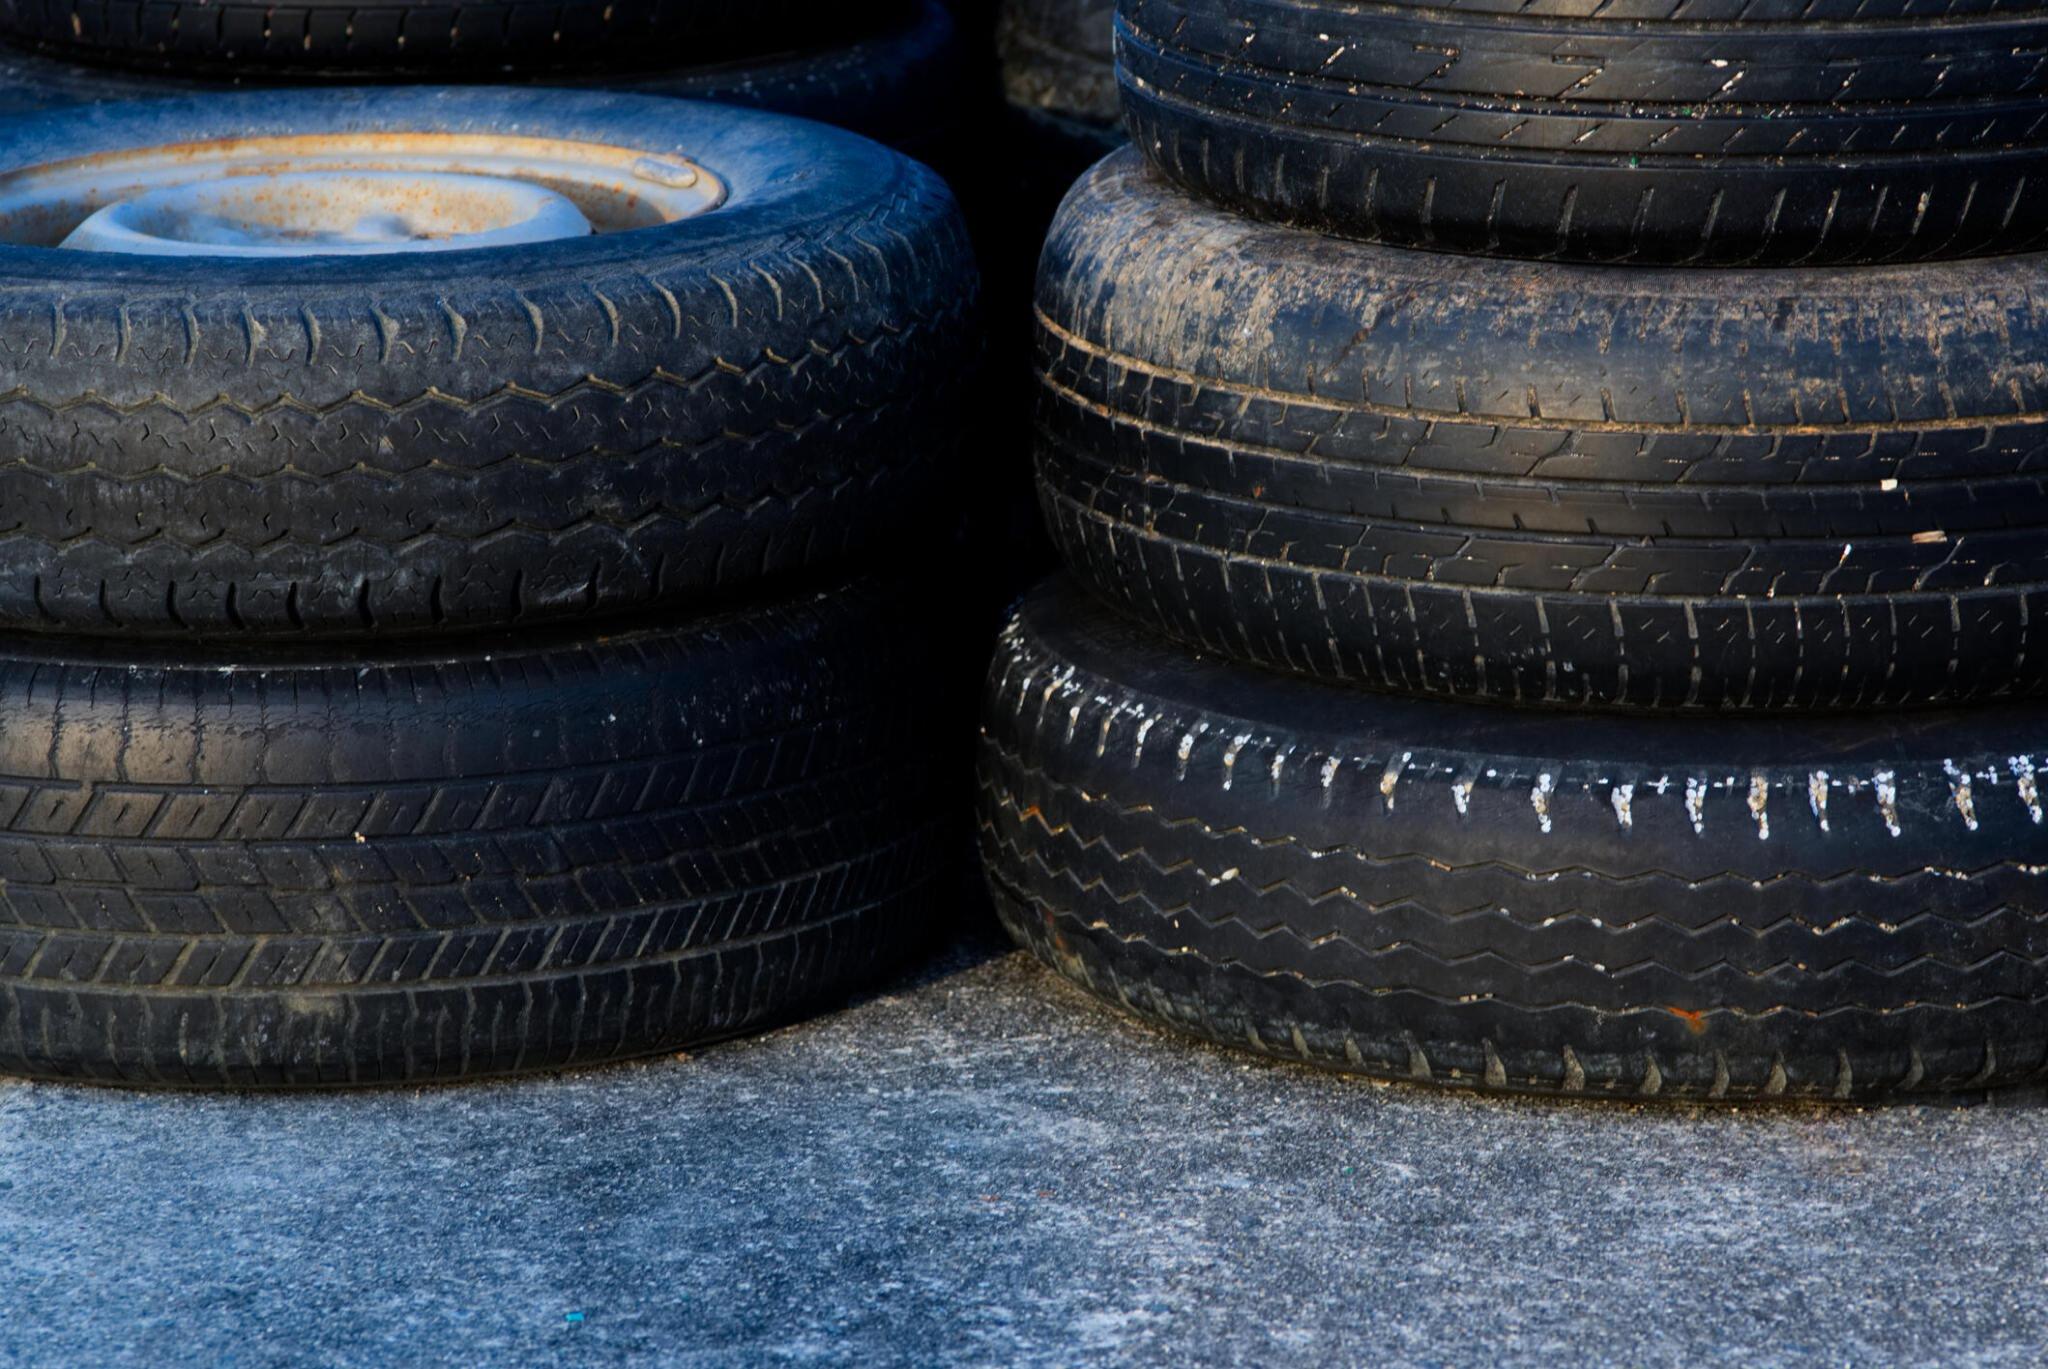 Used Tires: Maximize Value with Quality Used Tires